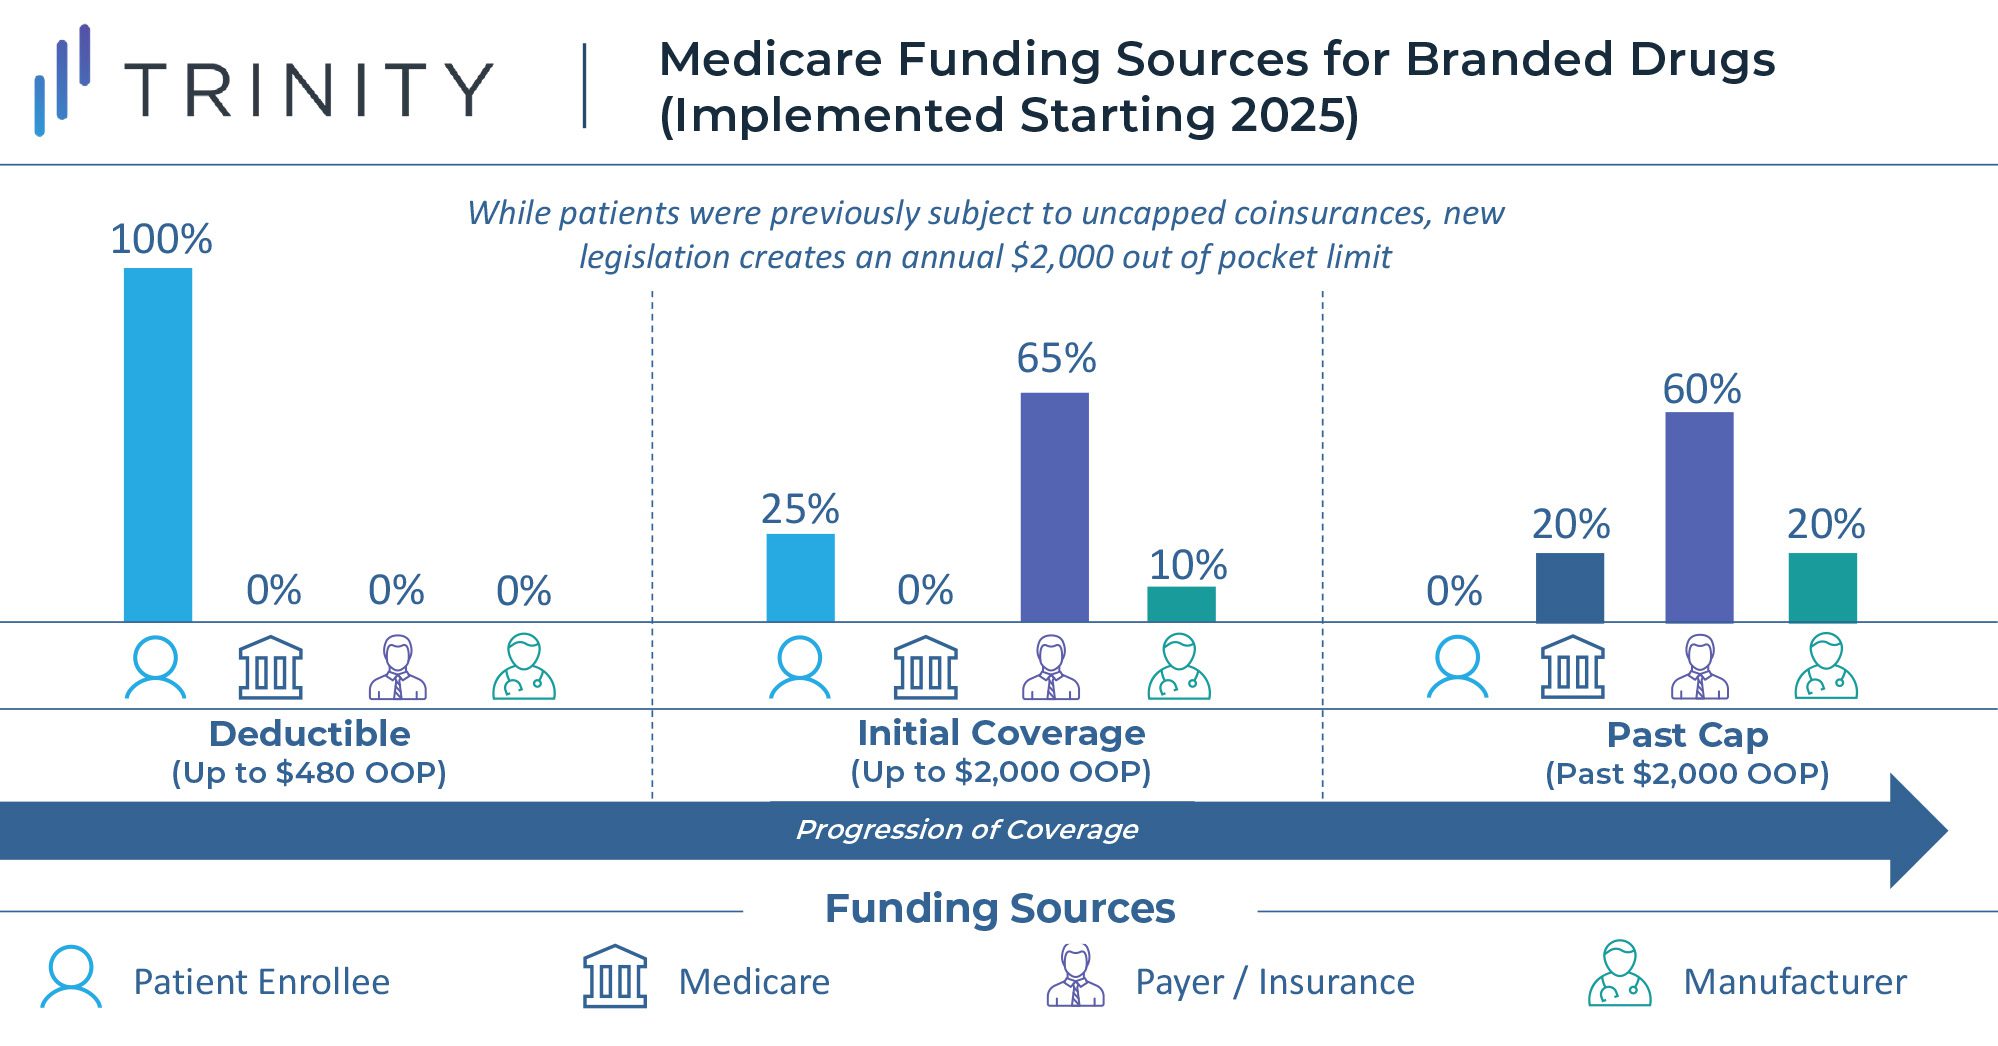 Medicare Funding Sources for Branded Drugs (Implemented Starting 2025)